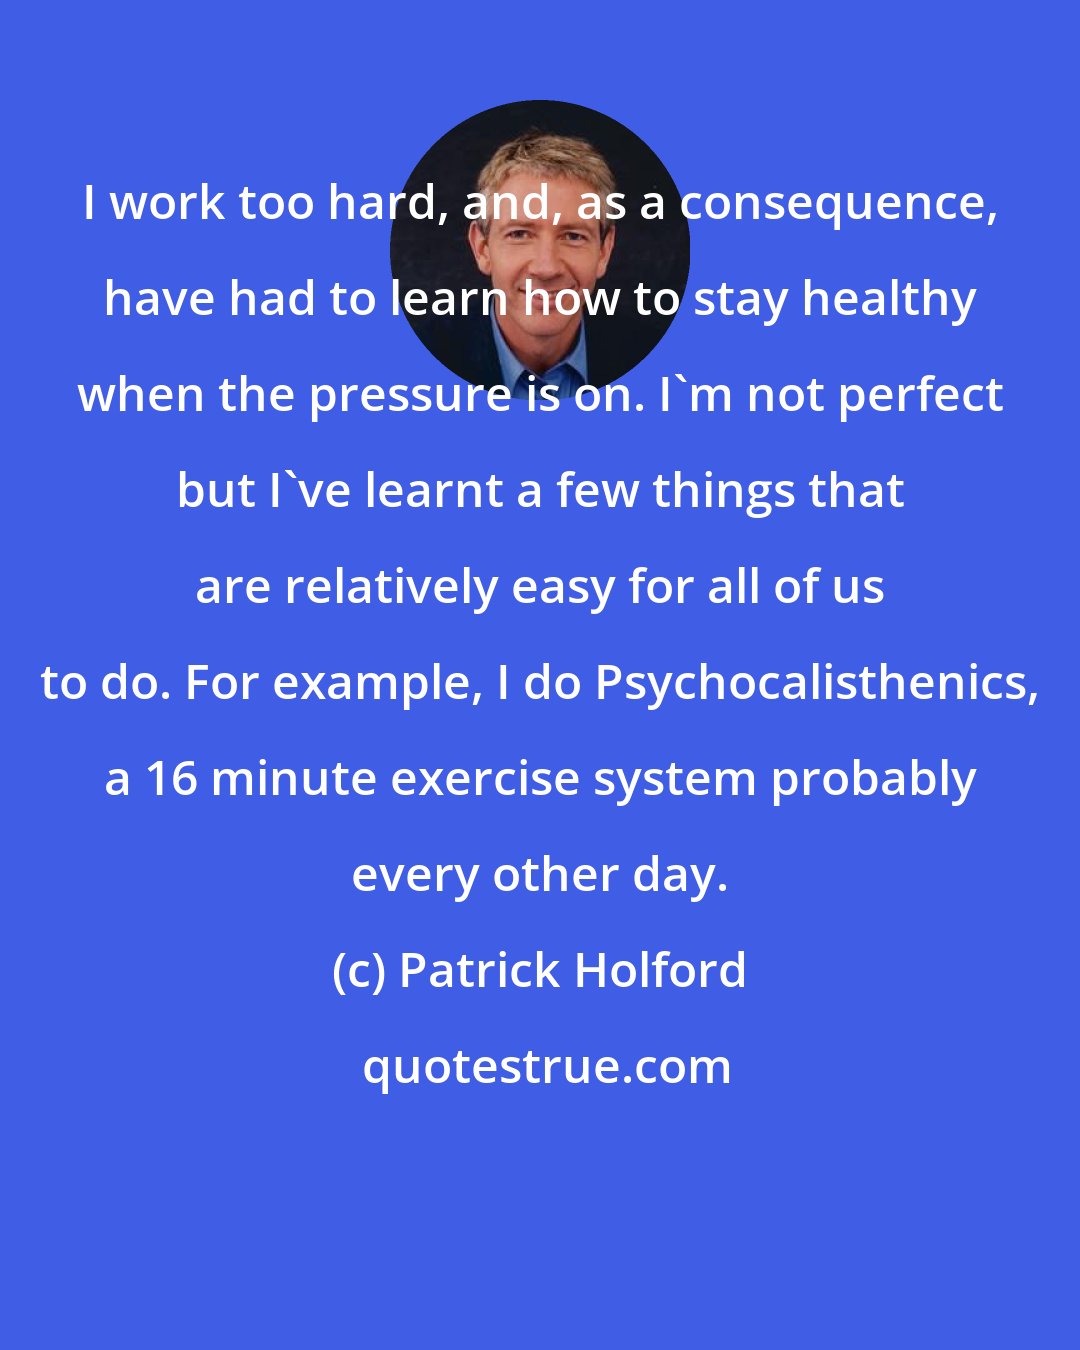 Patrick Holford: I work too hard, and, as a consequence, have had to learn how to stay healthy when the pressure is on. I'm not perfect but I've learnt a few things that are relatively easy for all of us to do. For example, I do Psychocalisthenics, a 16 minute exercise system probably every other day.